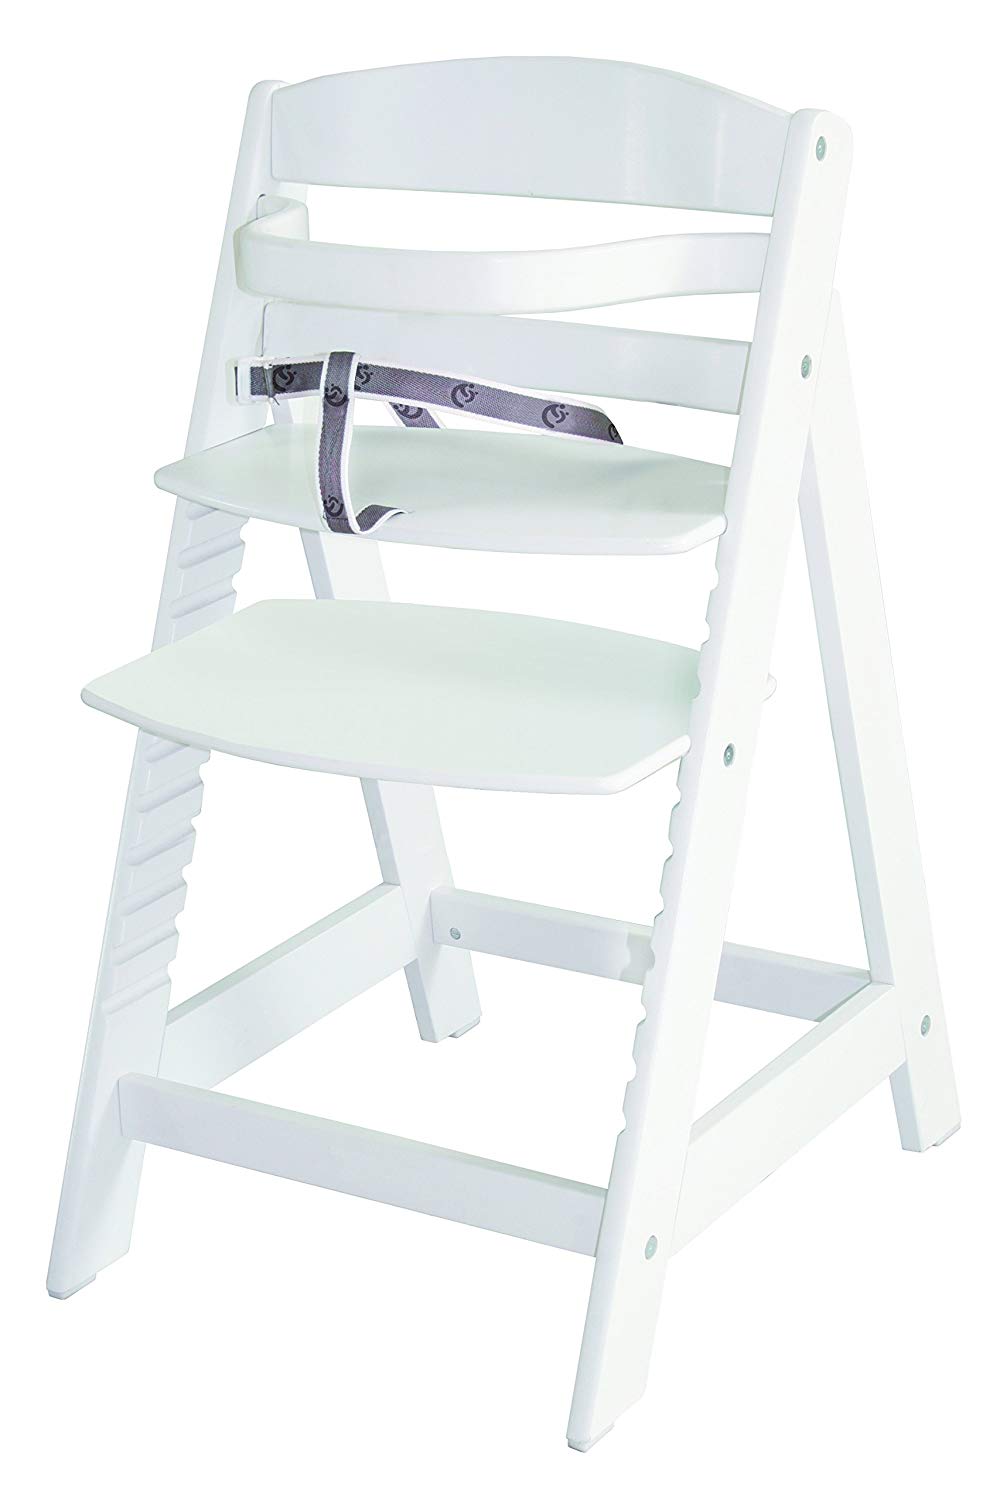 Roba Baumann Gmbh Sit Up Highchair With Steps (Painted White)